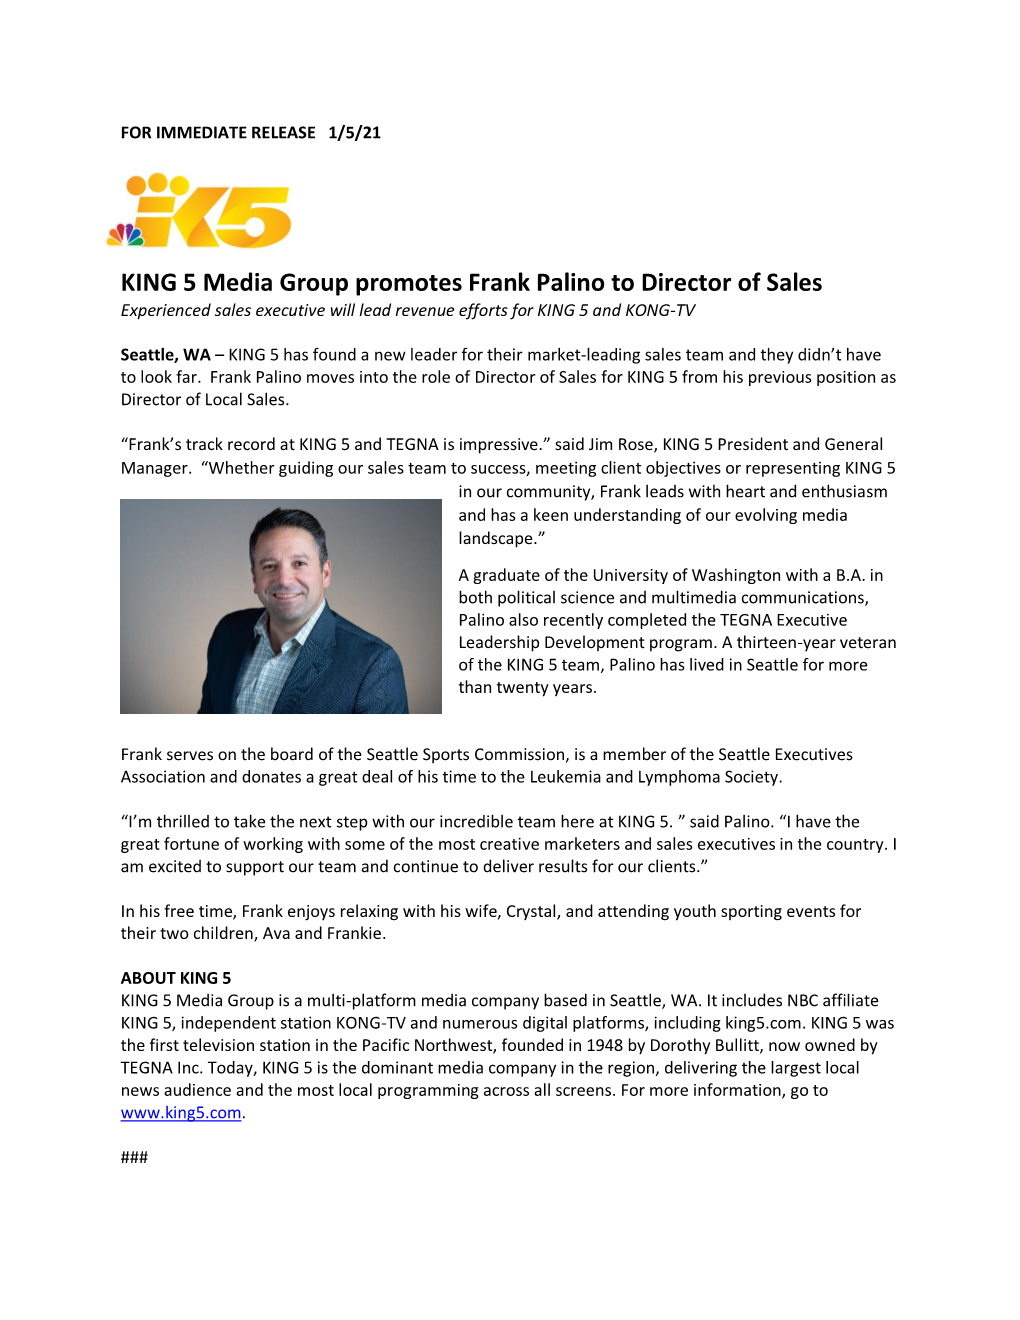 KING 5 Media Group Promotes Frank Palino to Director of Sales Experienced Sales Executive Will Lead Revenue Efforts for KING 5 and KONG-TV